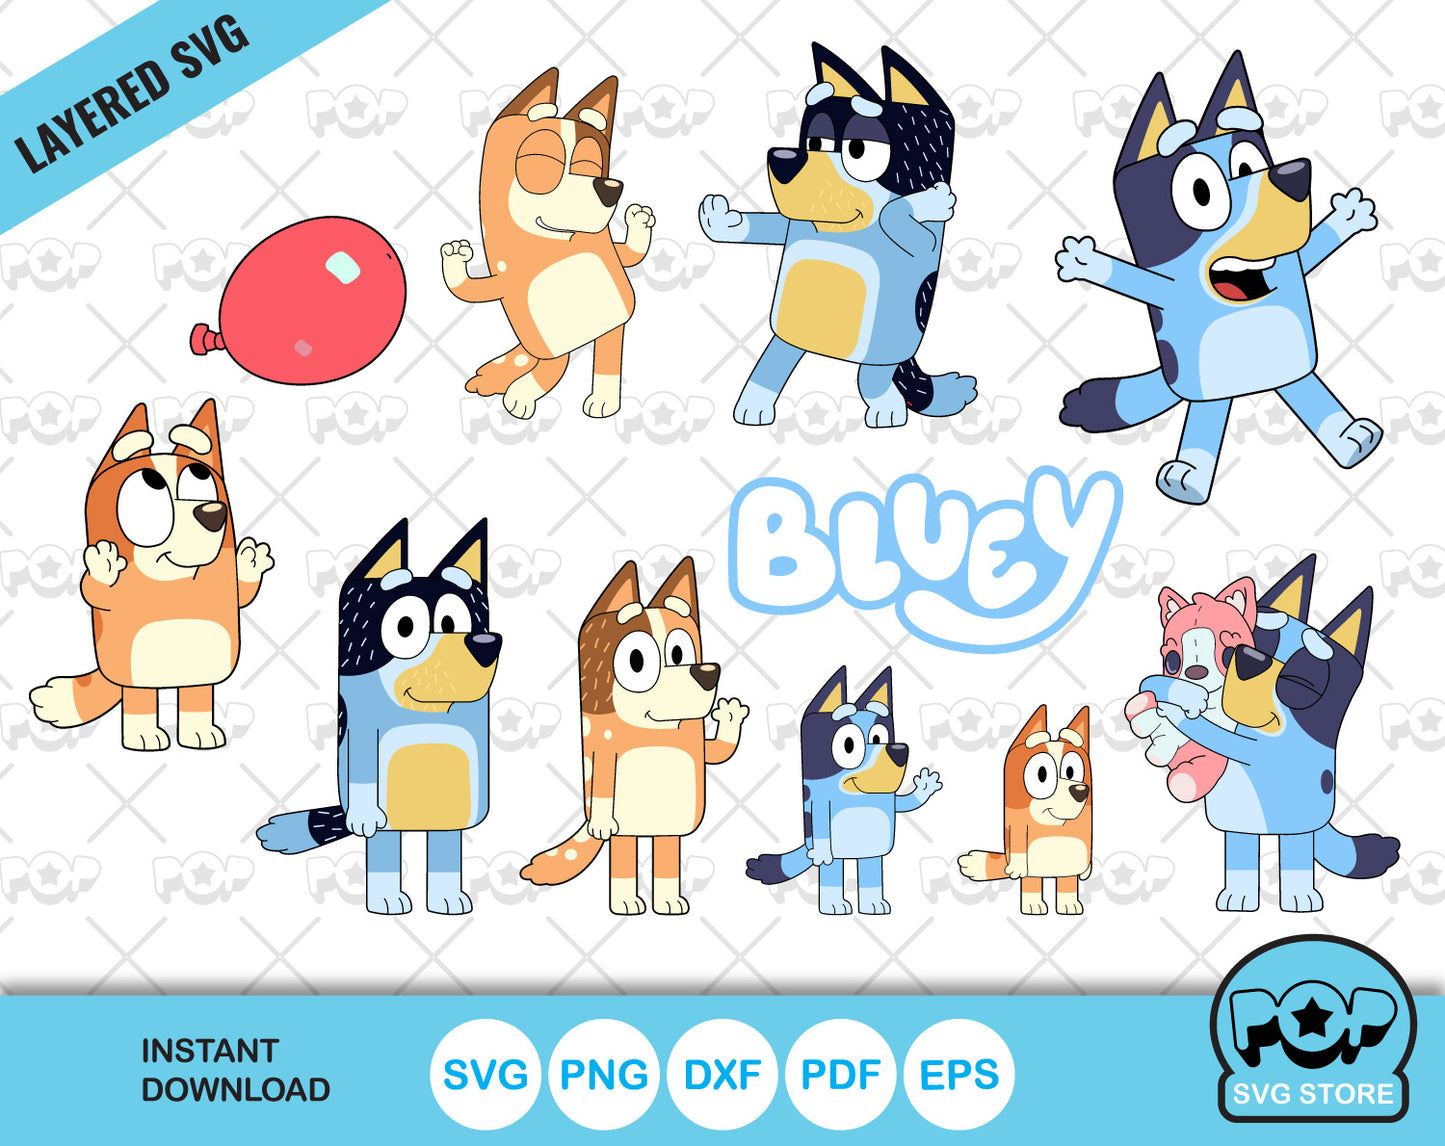 Bluey Family Iron On Design Cut Files - Instant Download Digital